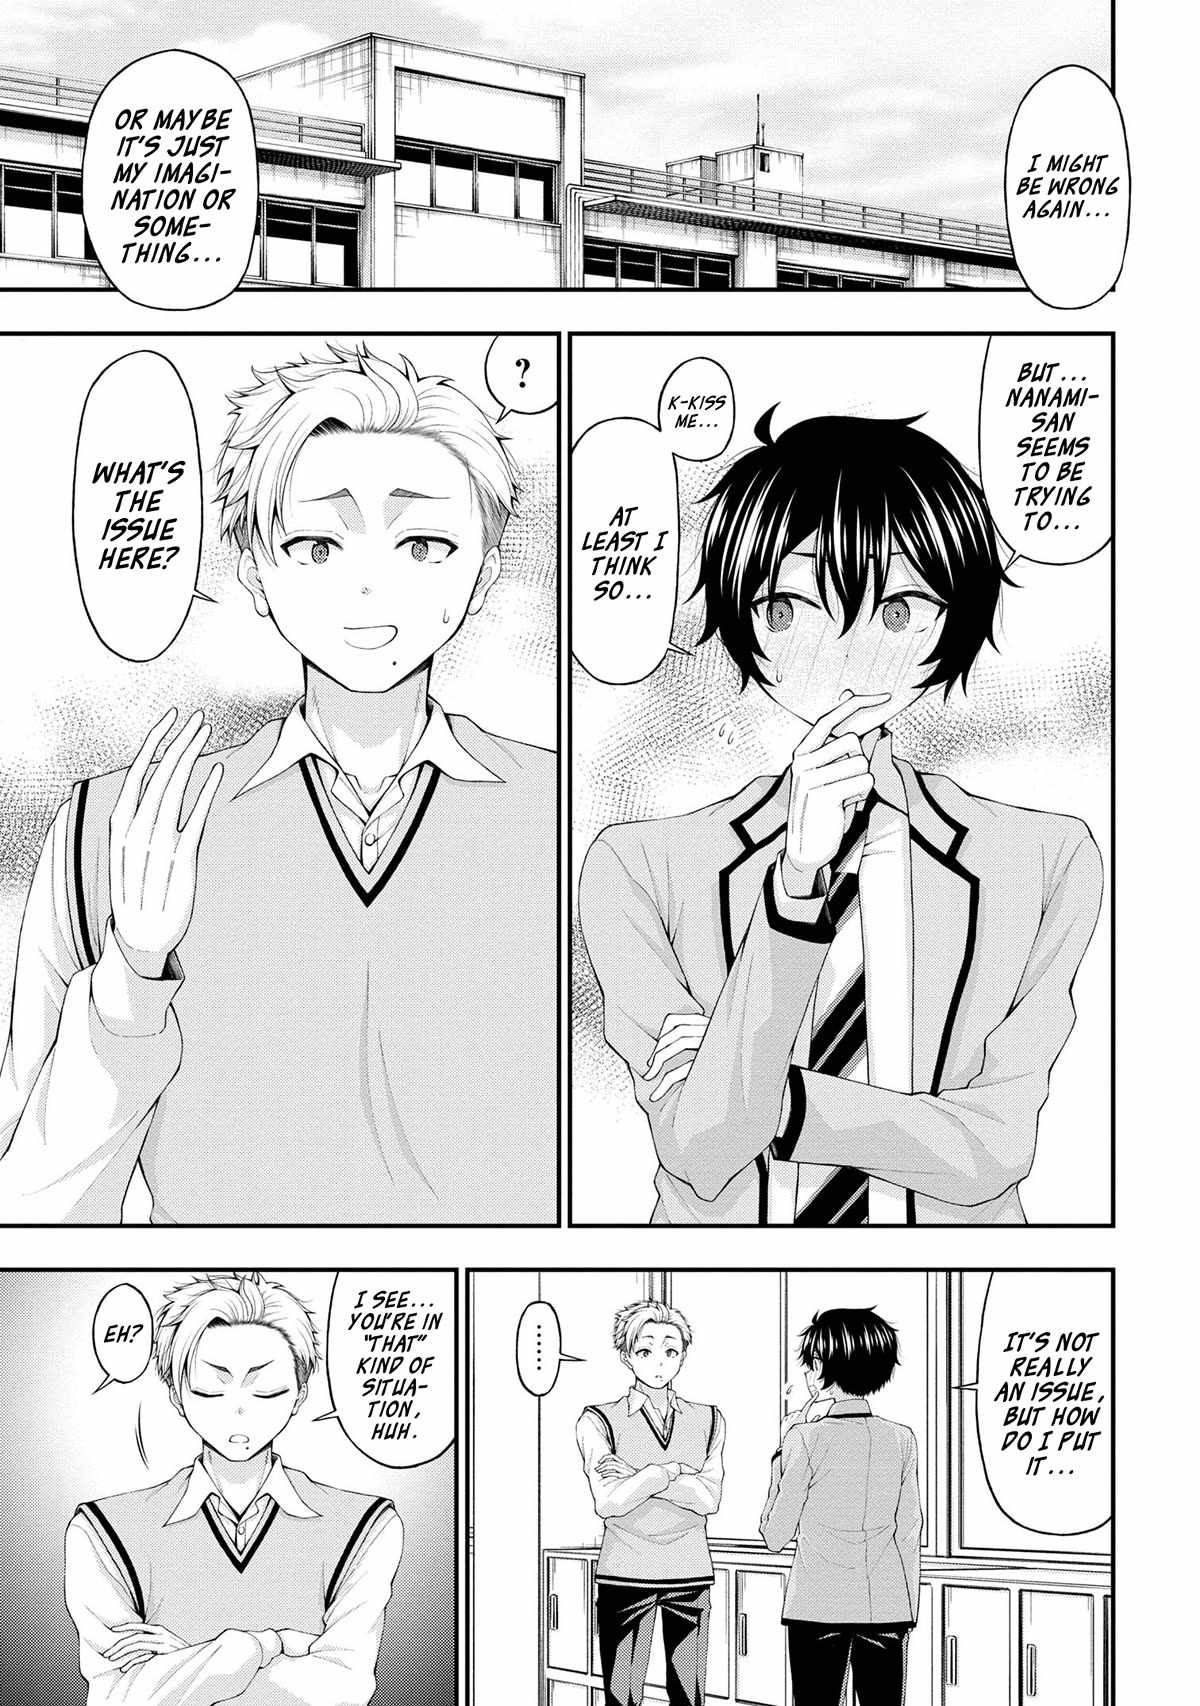 The Gal Who Was Meant to Confess to Me as a Game Punishment Has Apparently Fallen in Love with Me Chapter 13-eng-li - Page 20